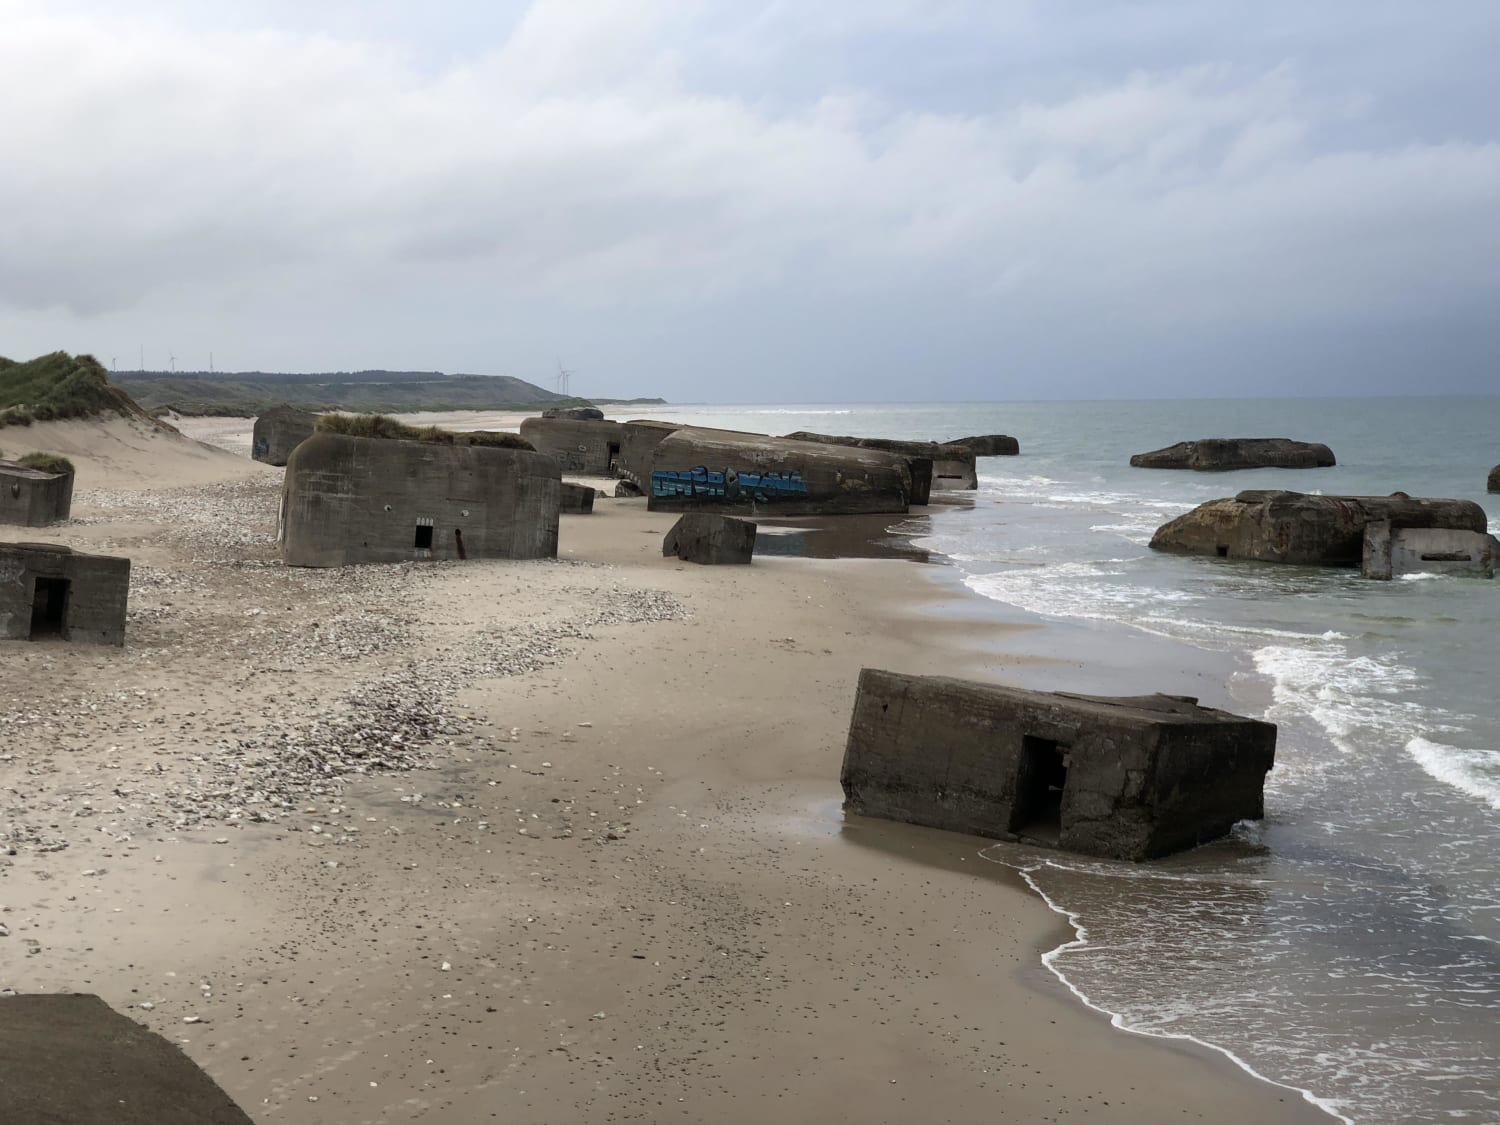 Nazi bunkers in Vigsö Denmark. Built in 1941 as a part of the Atlantic Wall. You can crawl around inside and climb up through a few. The sea is slowly claiming them.